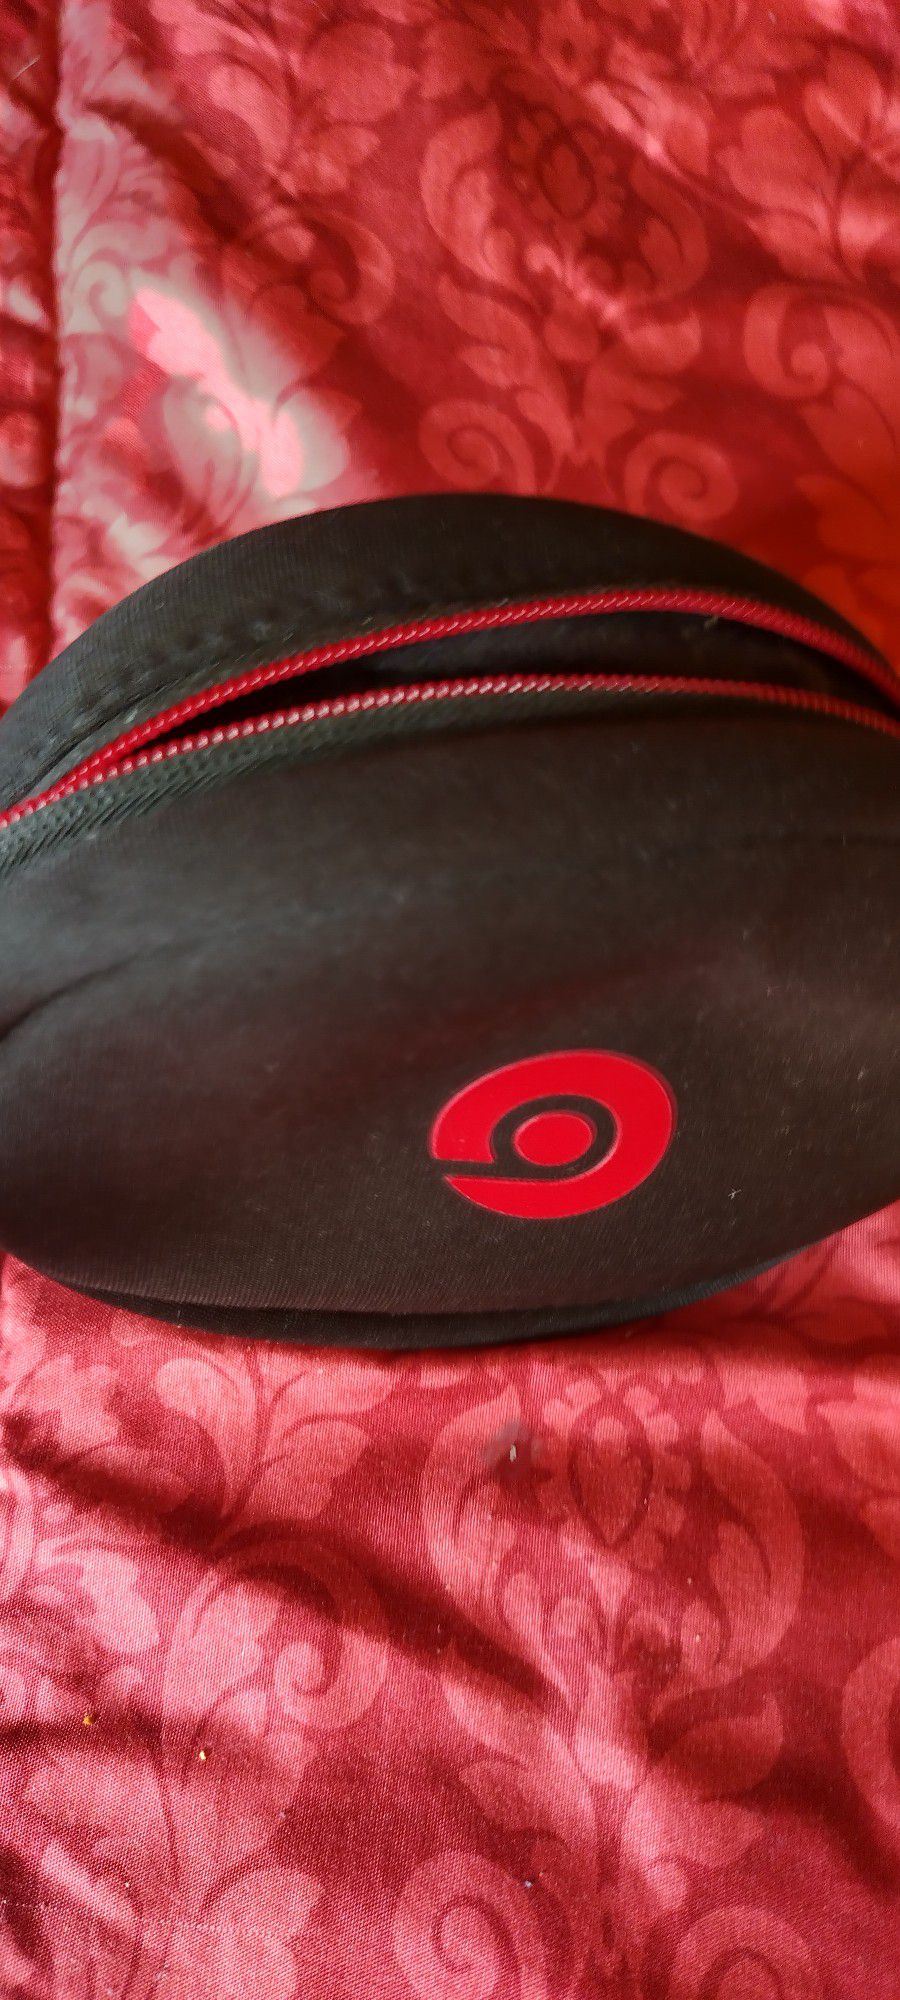 Beats Carrying Case For Headphones (Case ONLY)